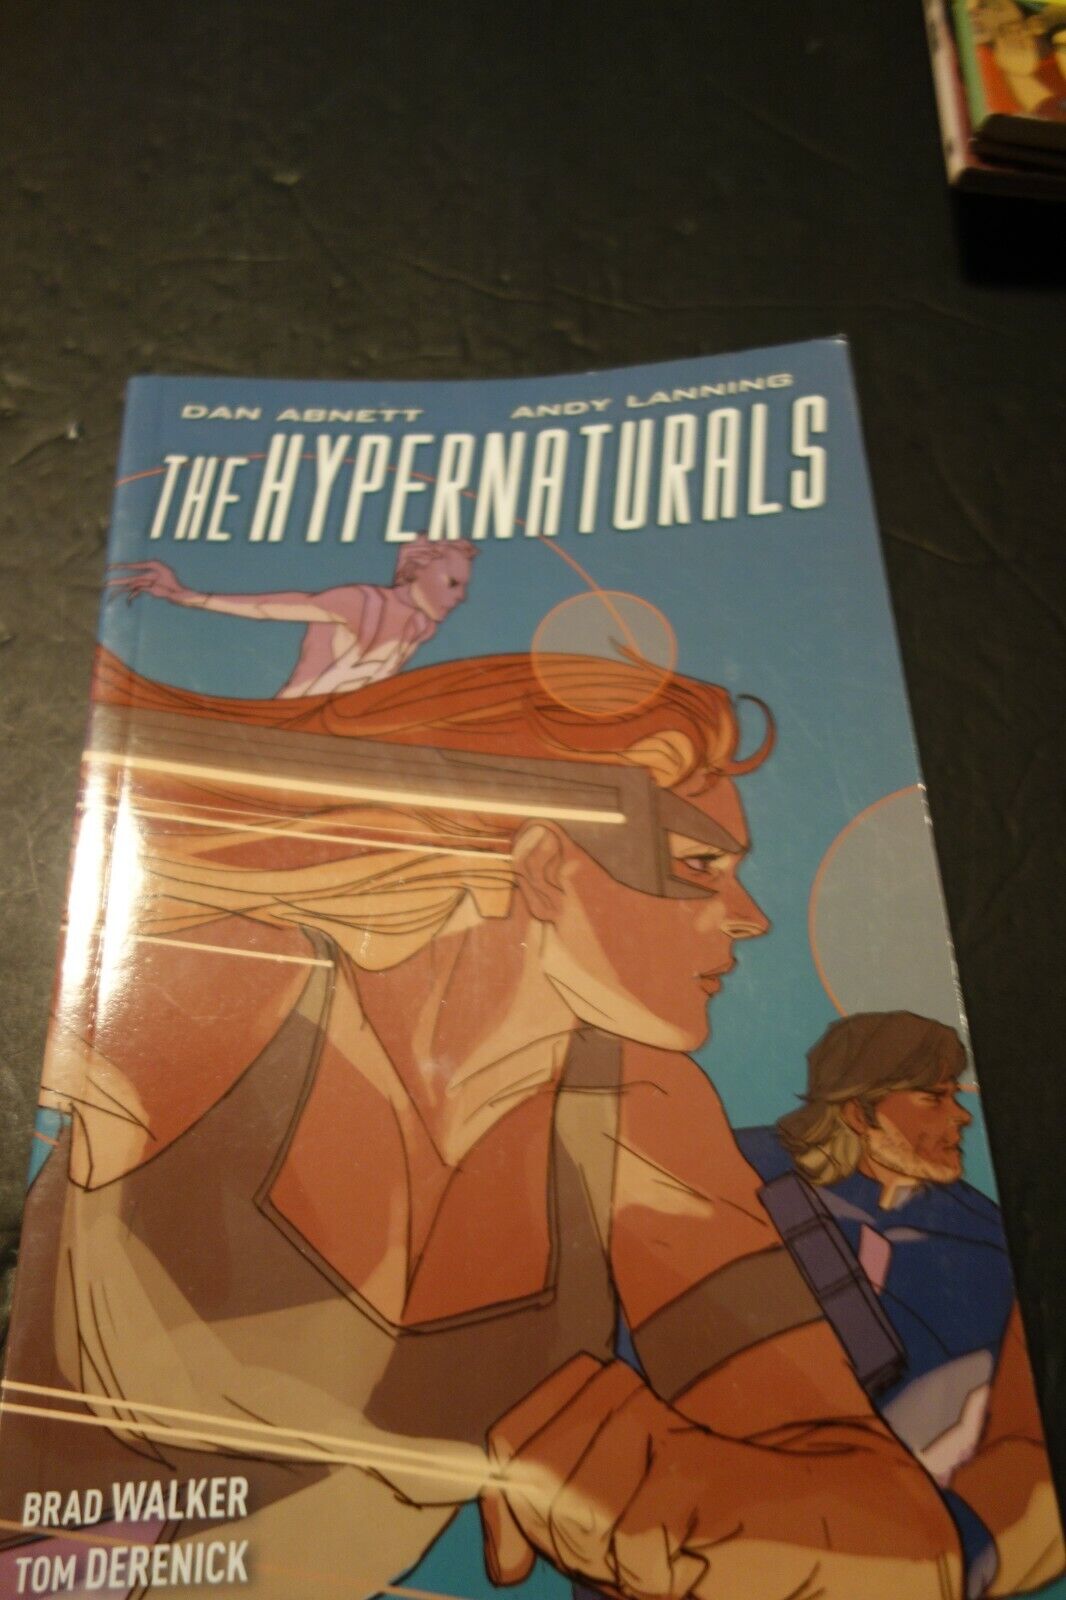 The Hypernaturals Vol. 1 by Dan Abnett and Andy Lanning (2013, Paperback)